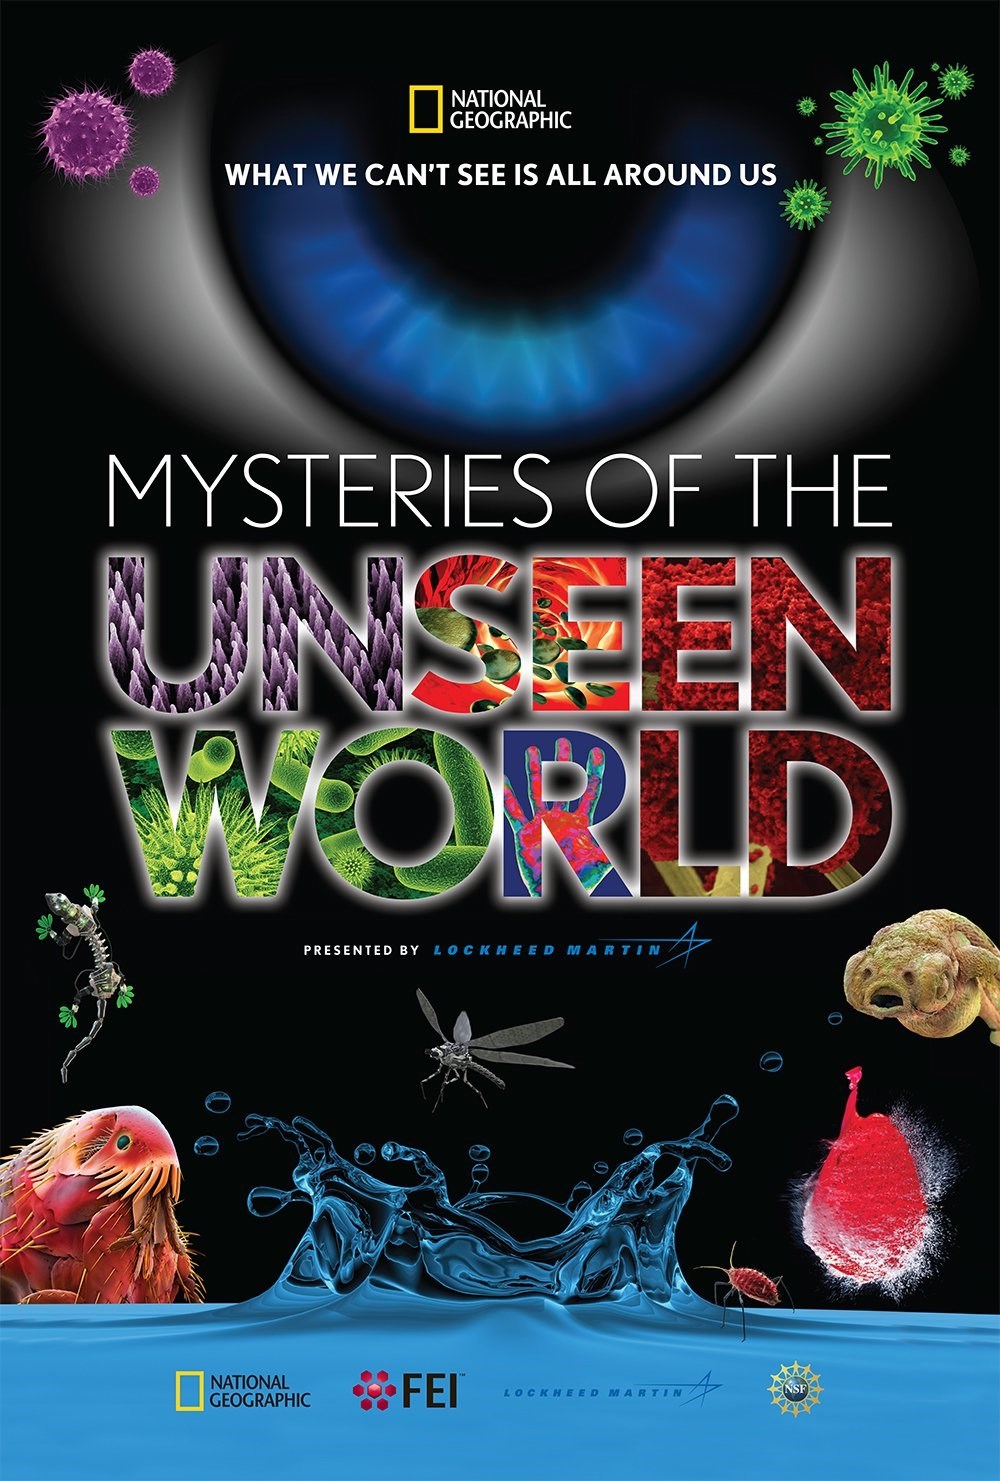 Mysteries of the Unseen World 2013